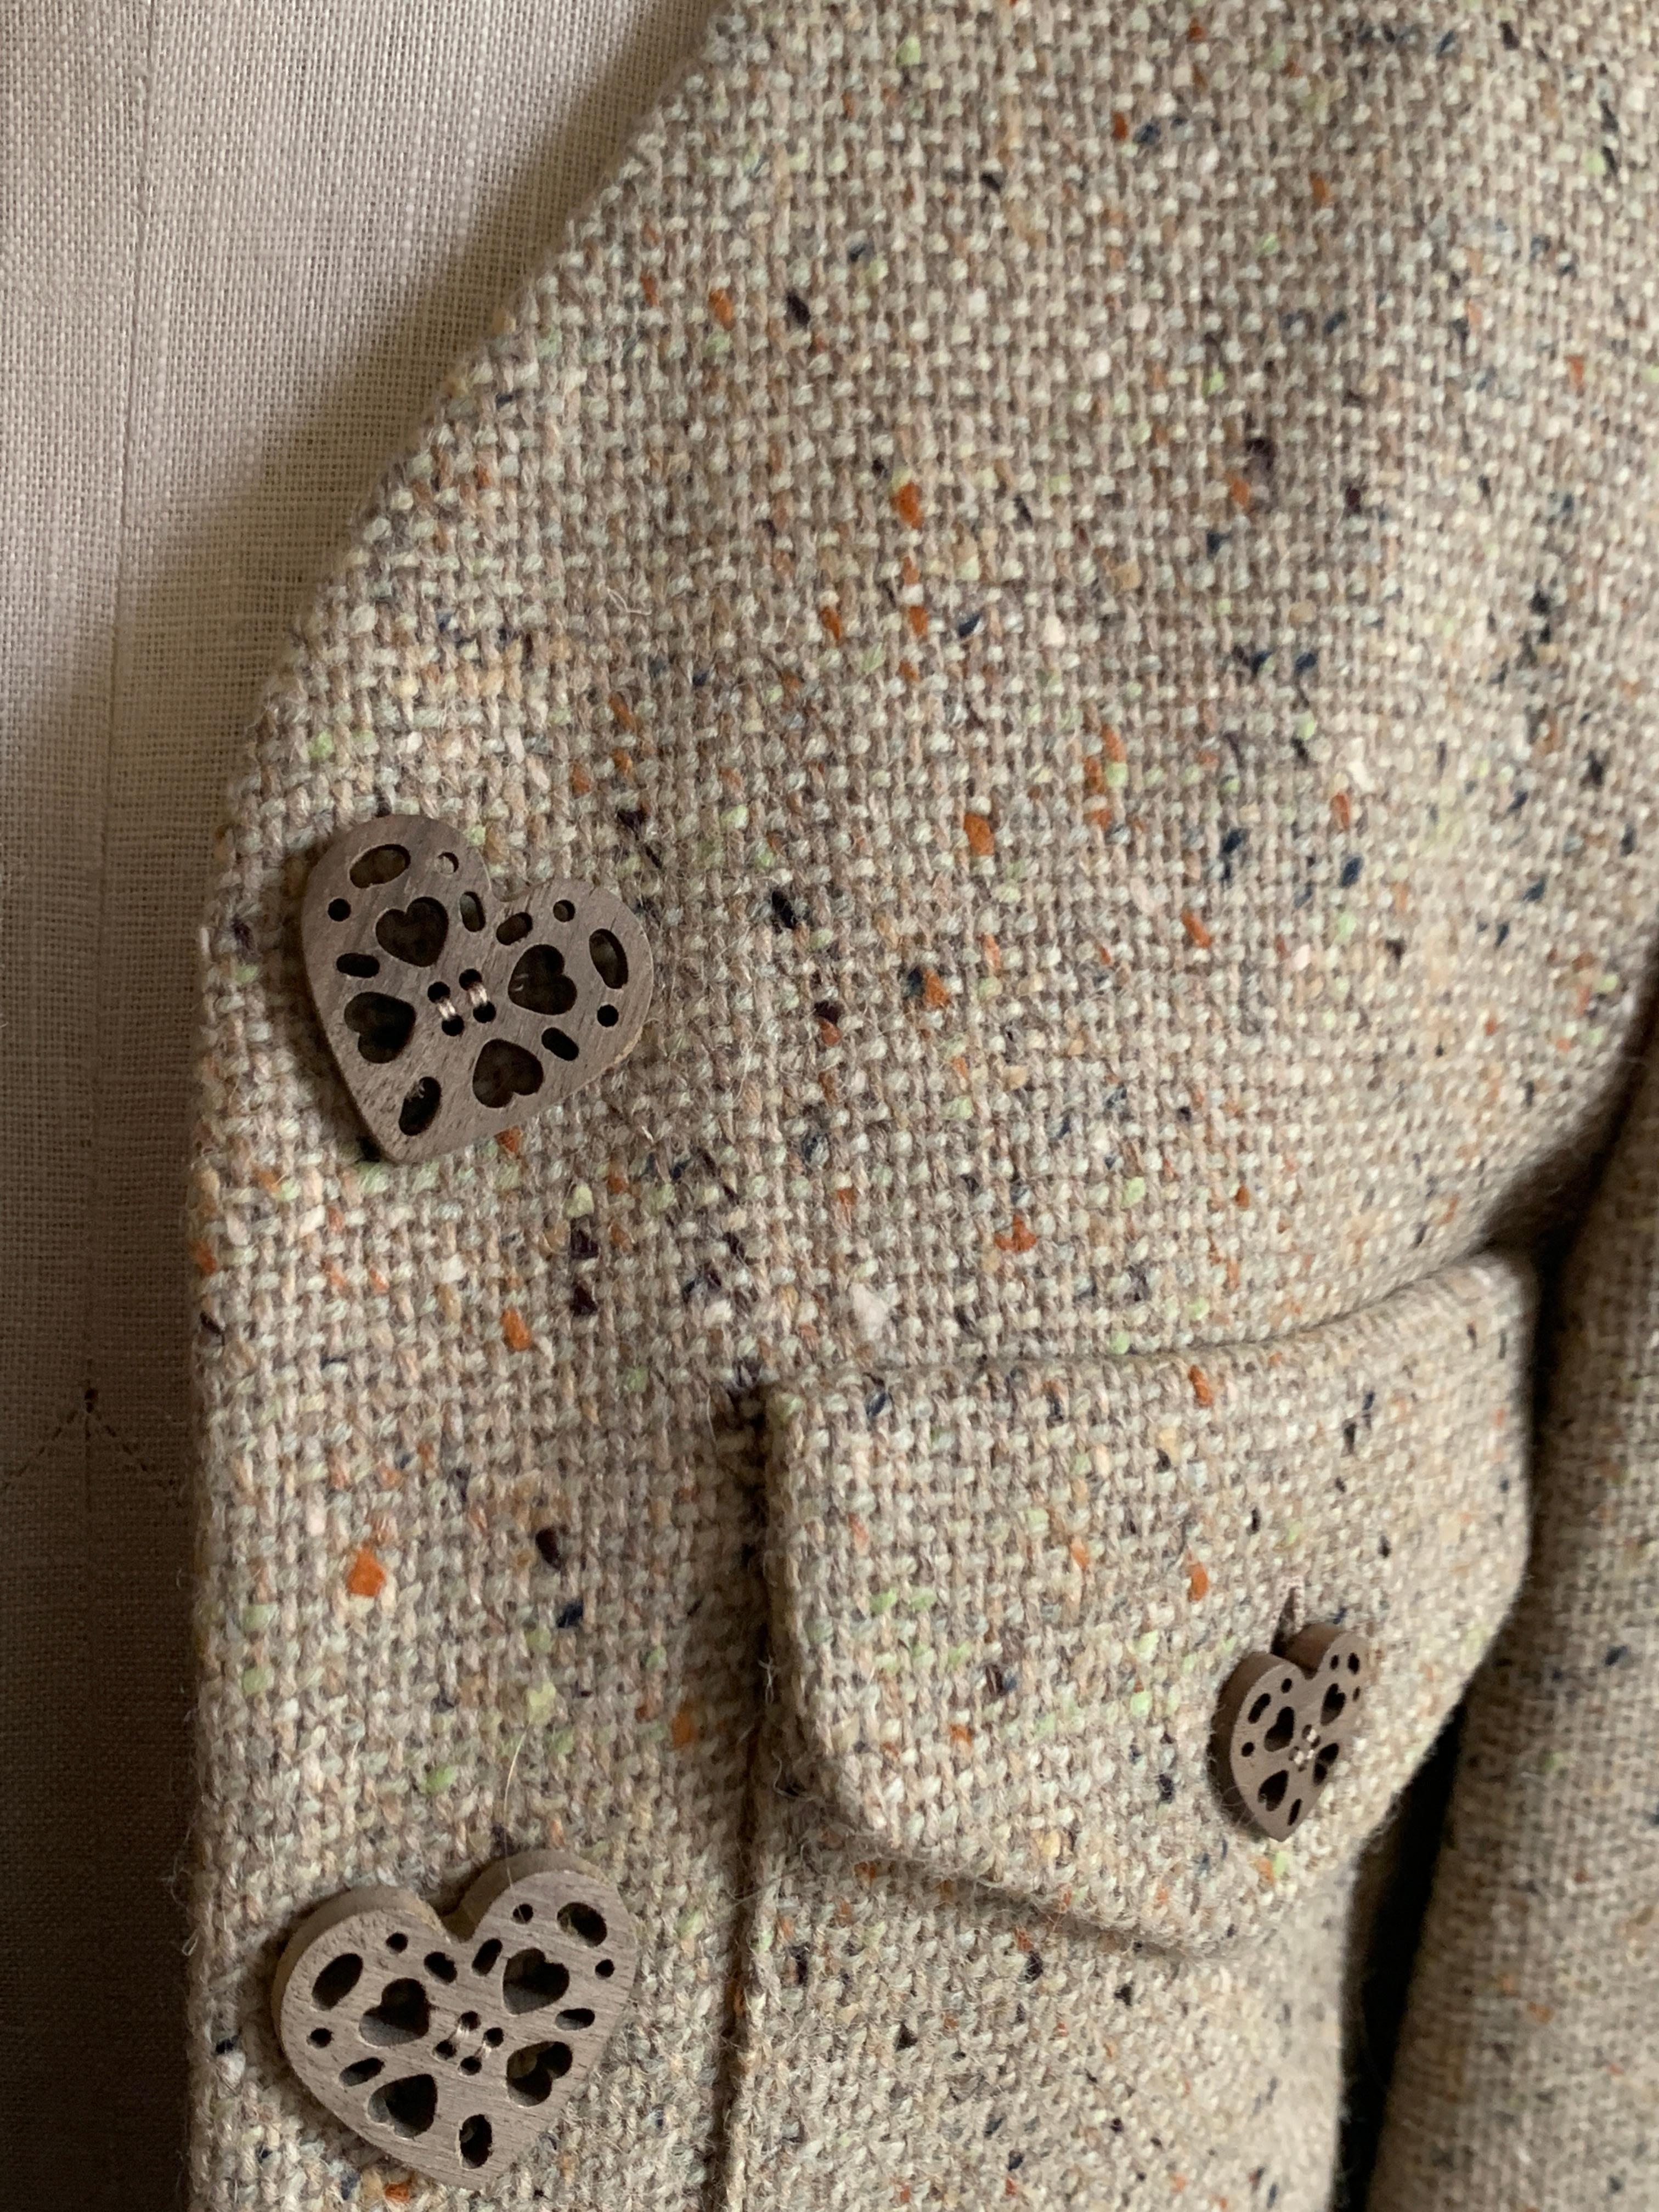 New Moschino Cheap & Chic 1990s Oatmeal Tweed Skirt Suit with Heart Buttons 1